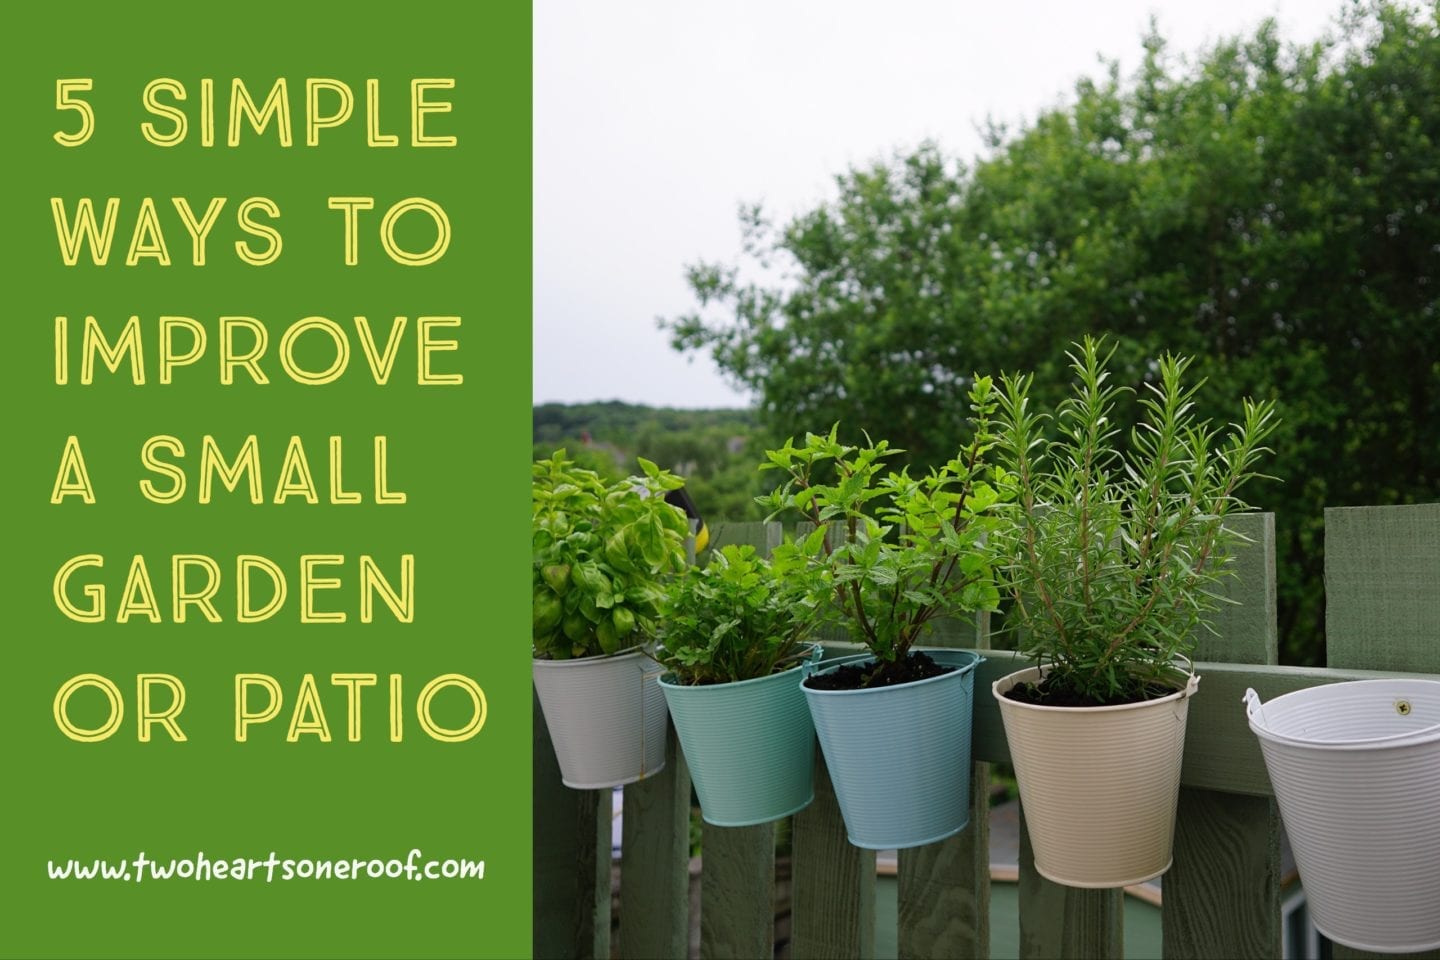 5 Simple Ways to Improve a Small Garden or Patio